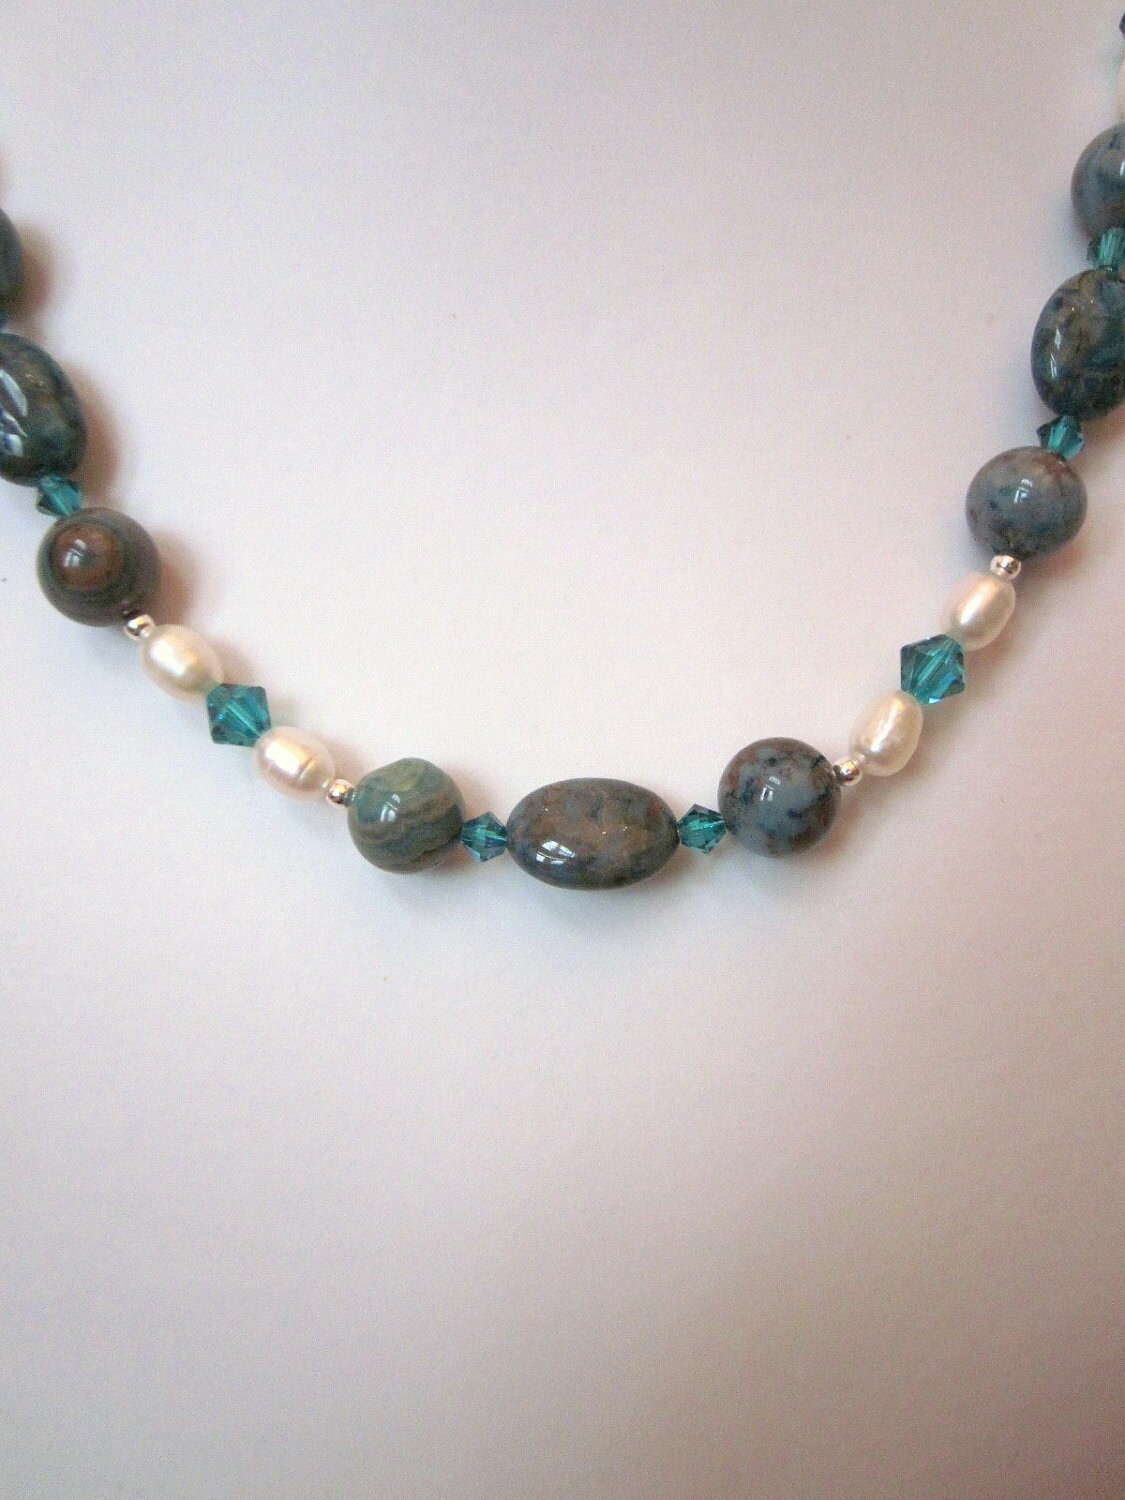 Necklace of Blue dyed Crazy Lace Agate White Freshwater - Etsy